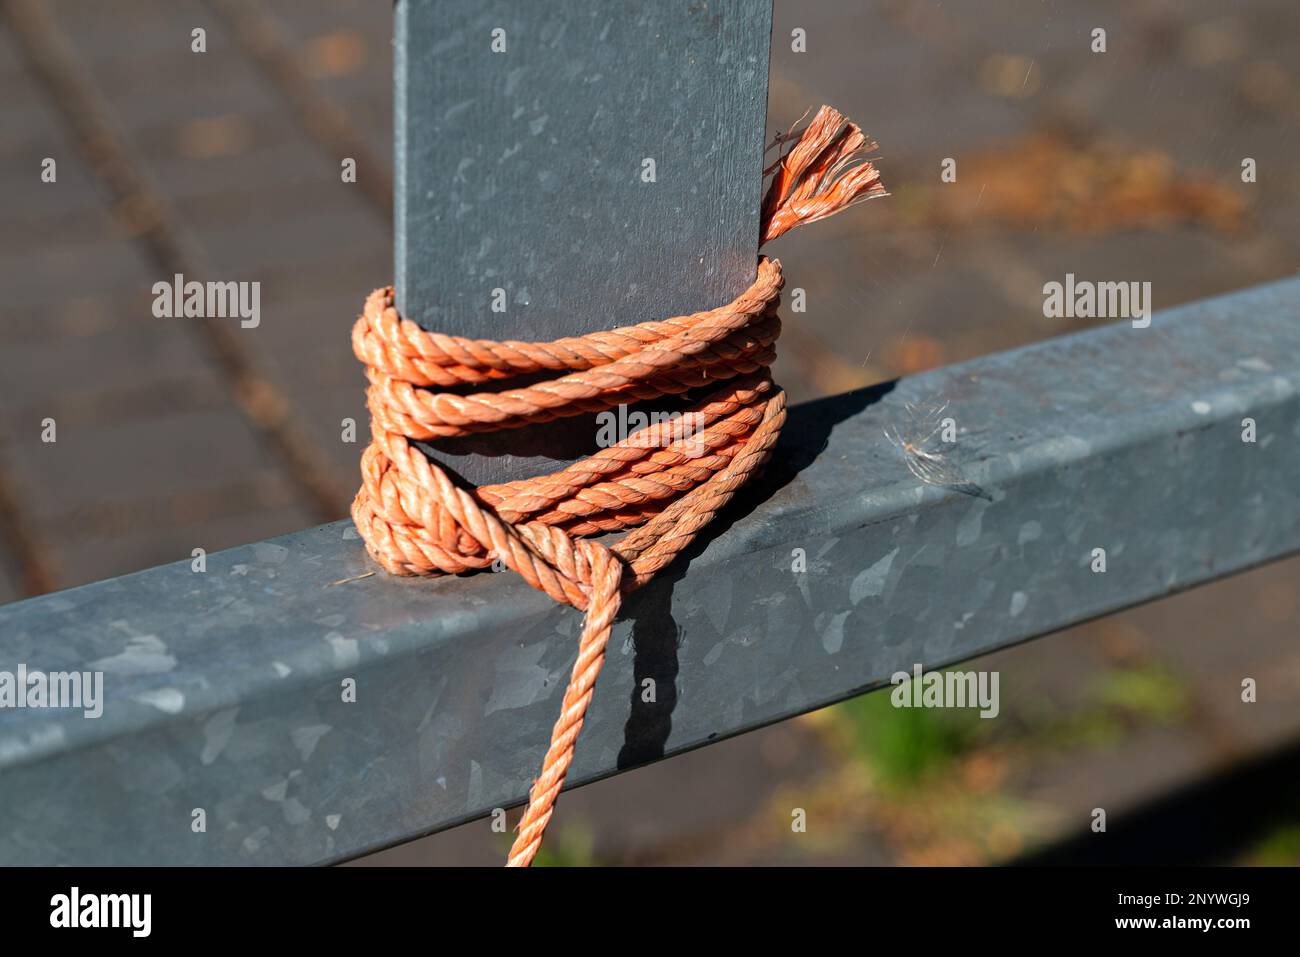 Orange Rope Tied To A Metal Fence Knots On The Iron Beam Close Up